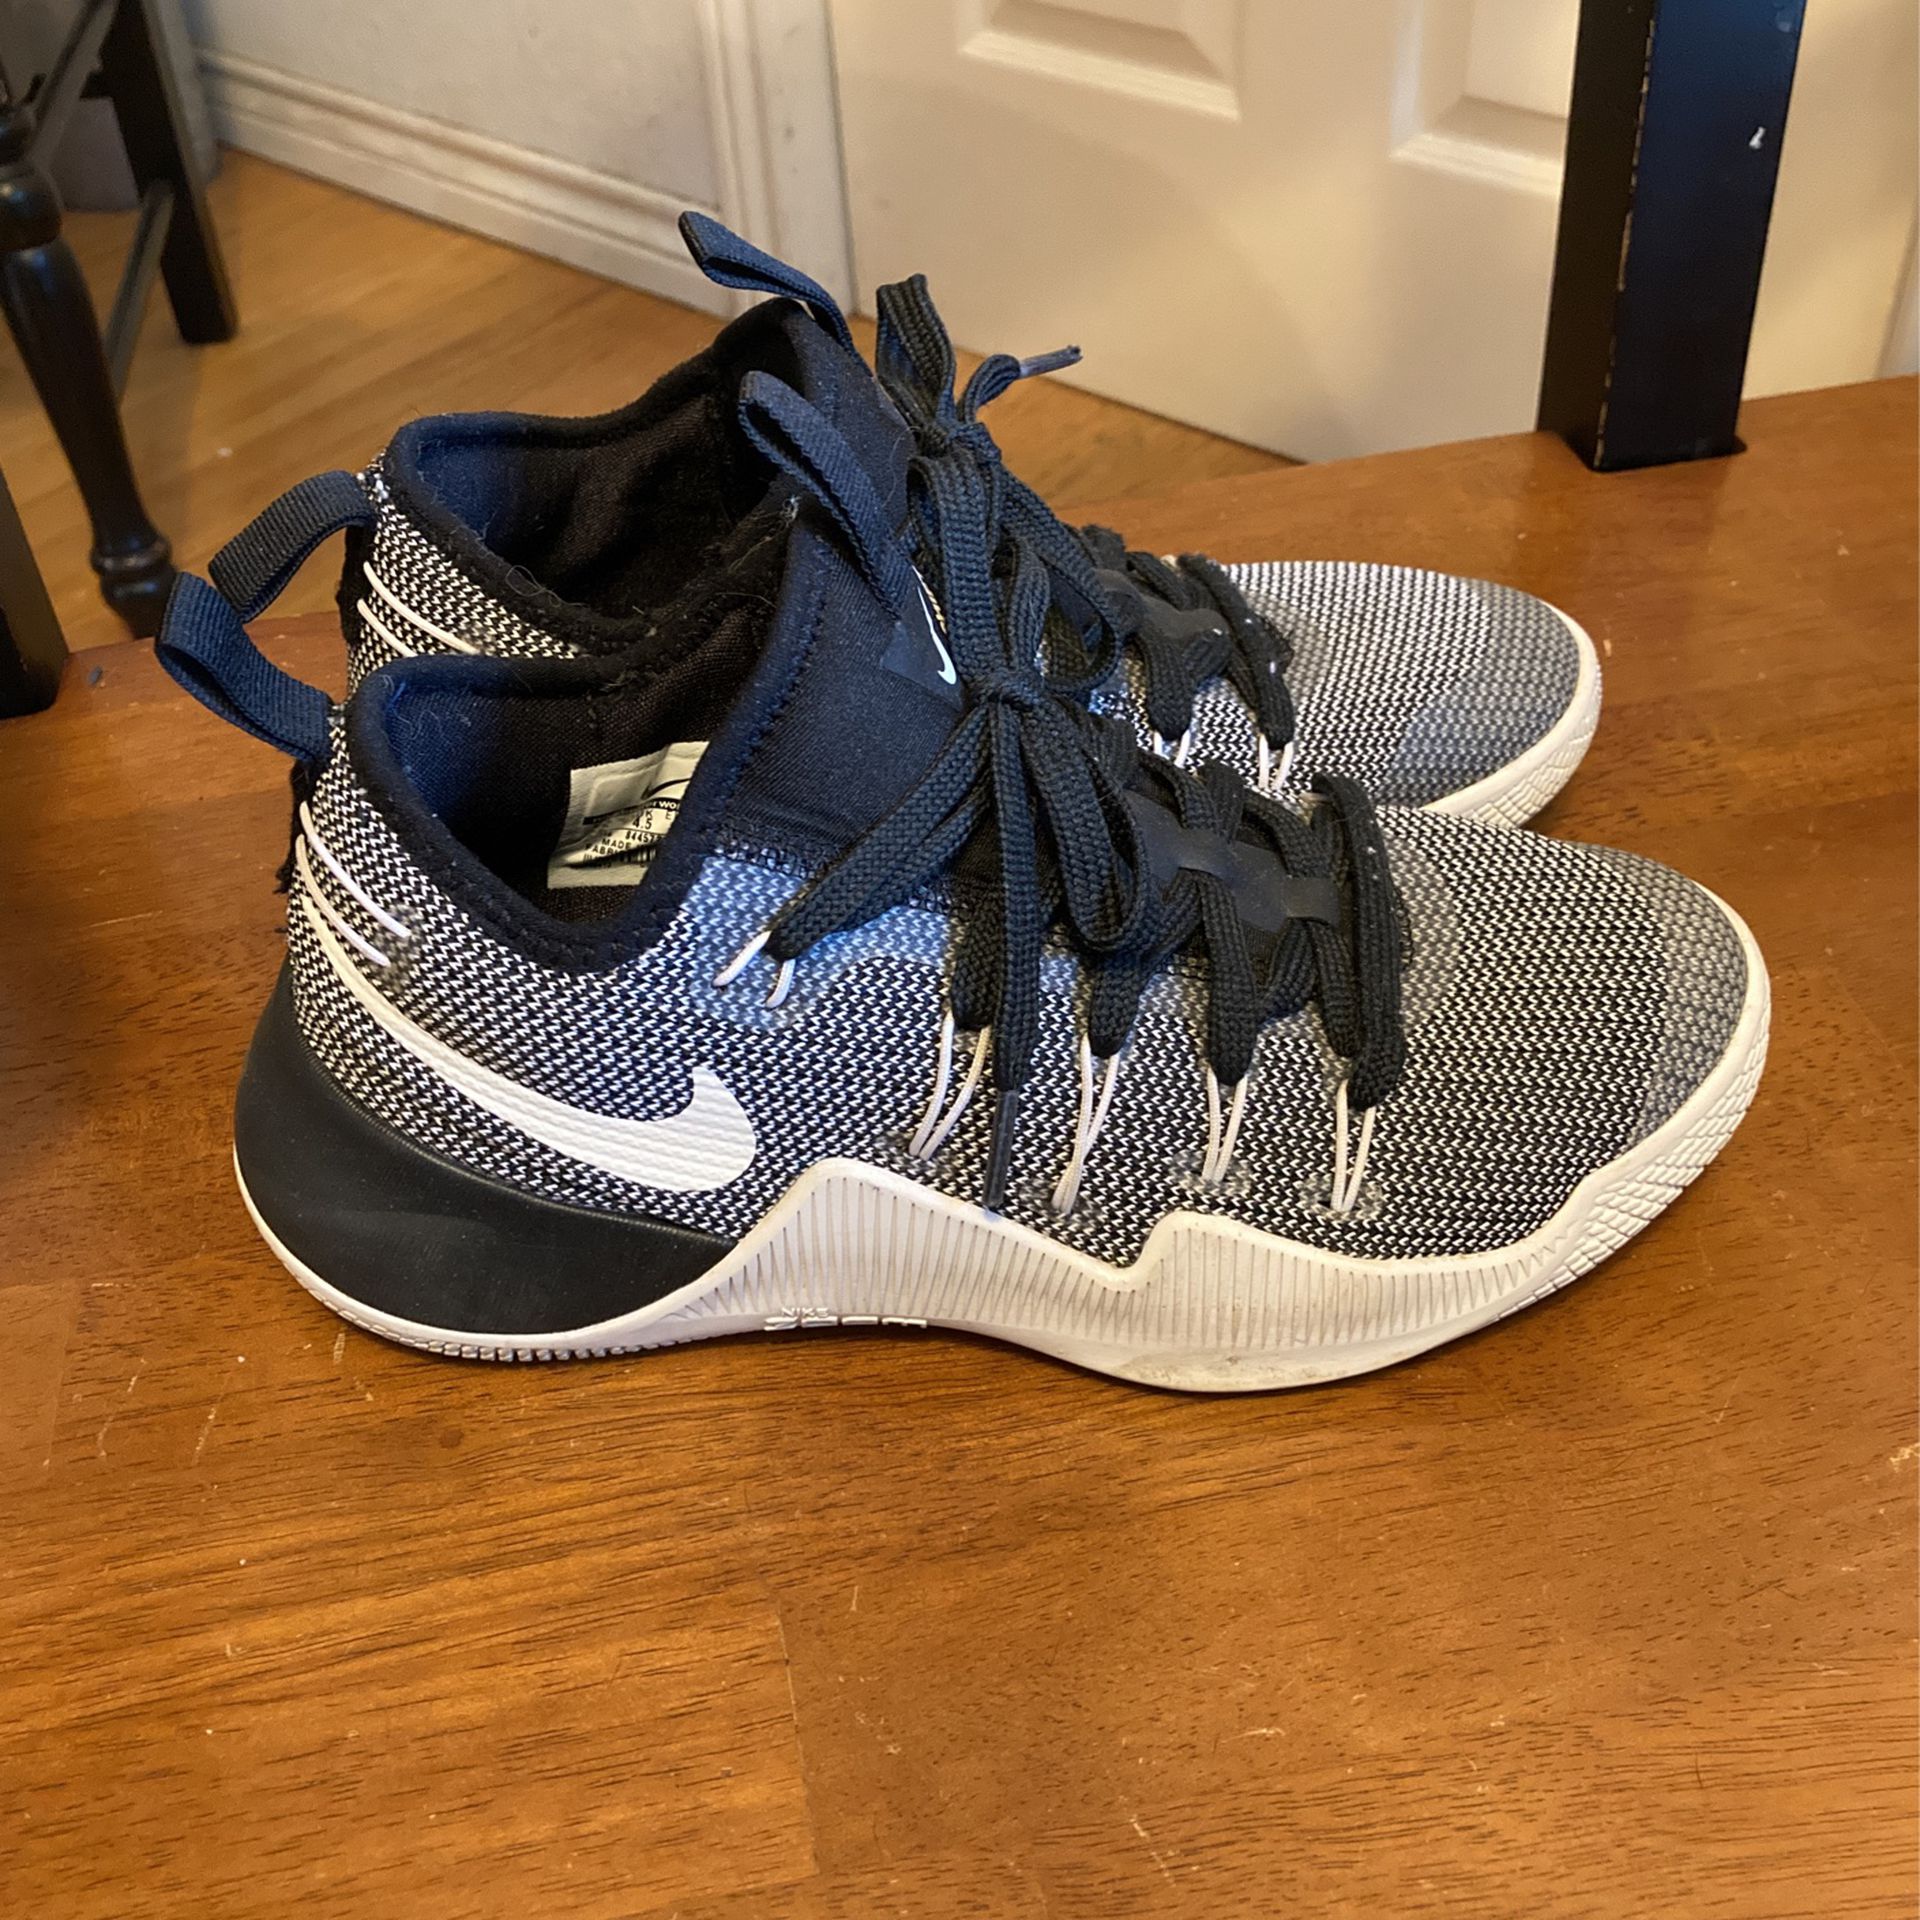 Nike Hypershift in Tumwater, - OfferUp